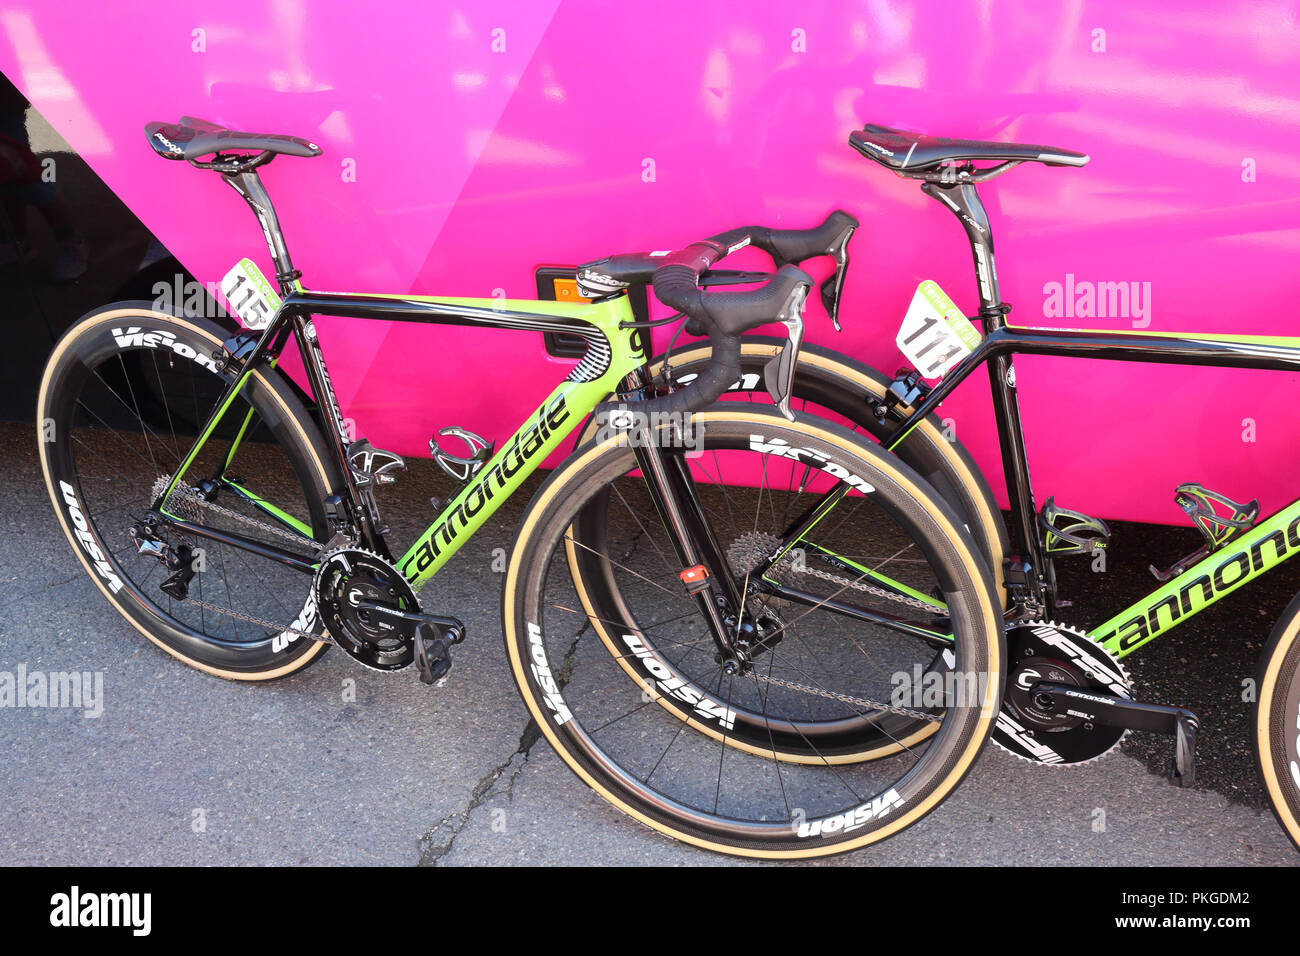 Ejea de los Caballeros, Spain. 13th Sep, 2018. Daniel Moreno Fernandez and Rigoberto Uran bicycles at TEAM EF EDUCATION FIRST DRAPAC PB CANNONDALE bus at the start of the Vuelta de Espana, stage 18. Isacco Coccato/Alamy Live News Stock Photo